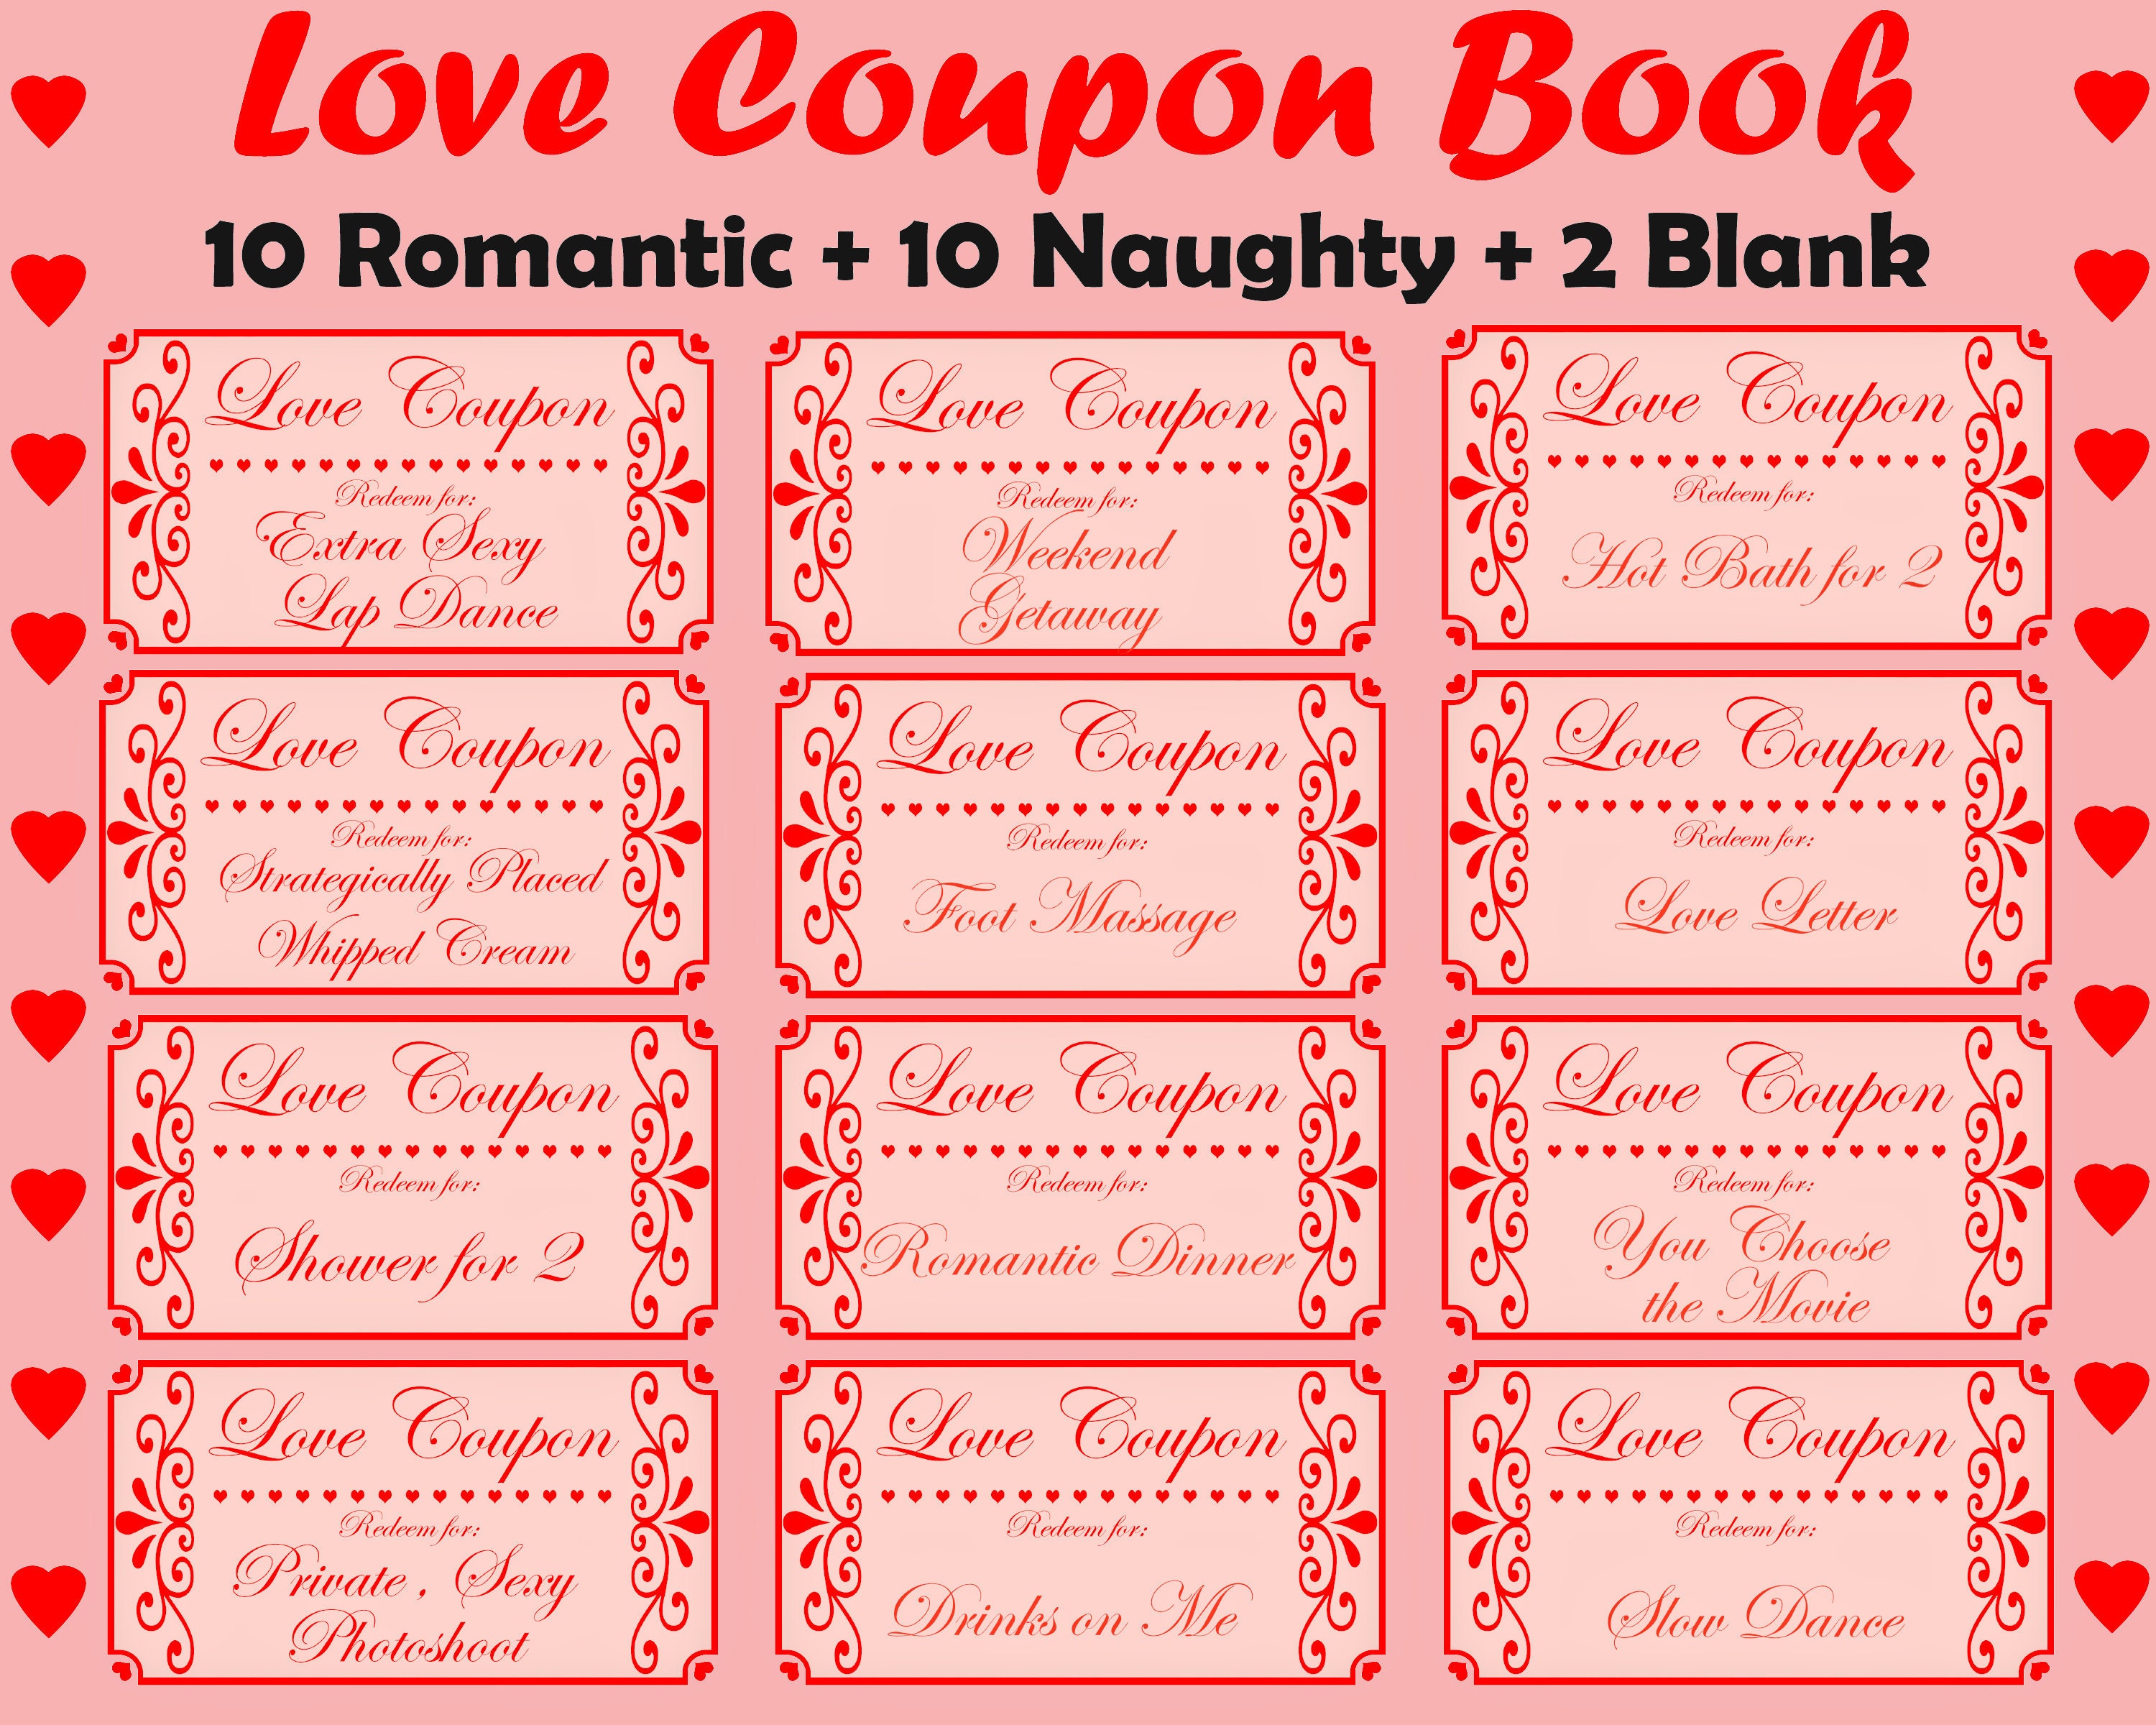 love-coupon-book-printable-love-coupons-romantic-coupon-etsy-canada